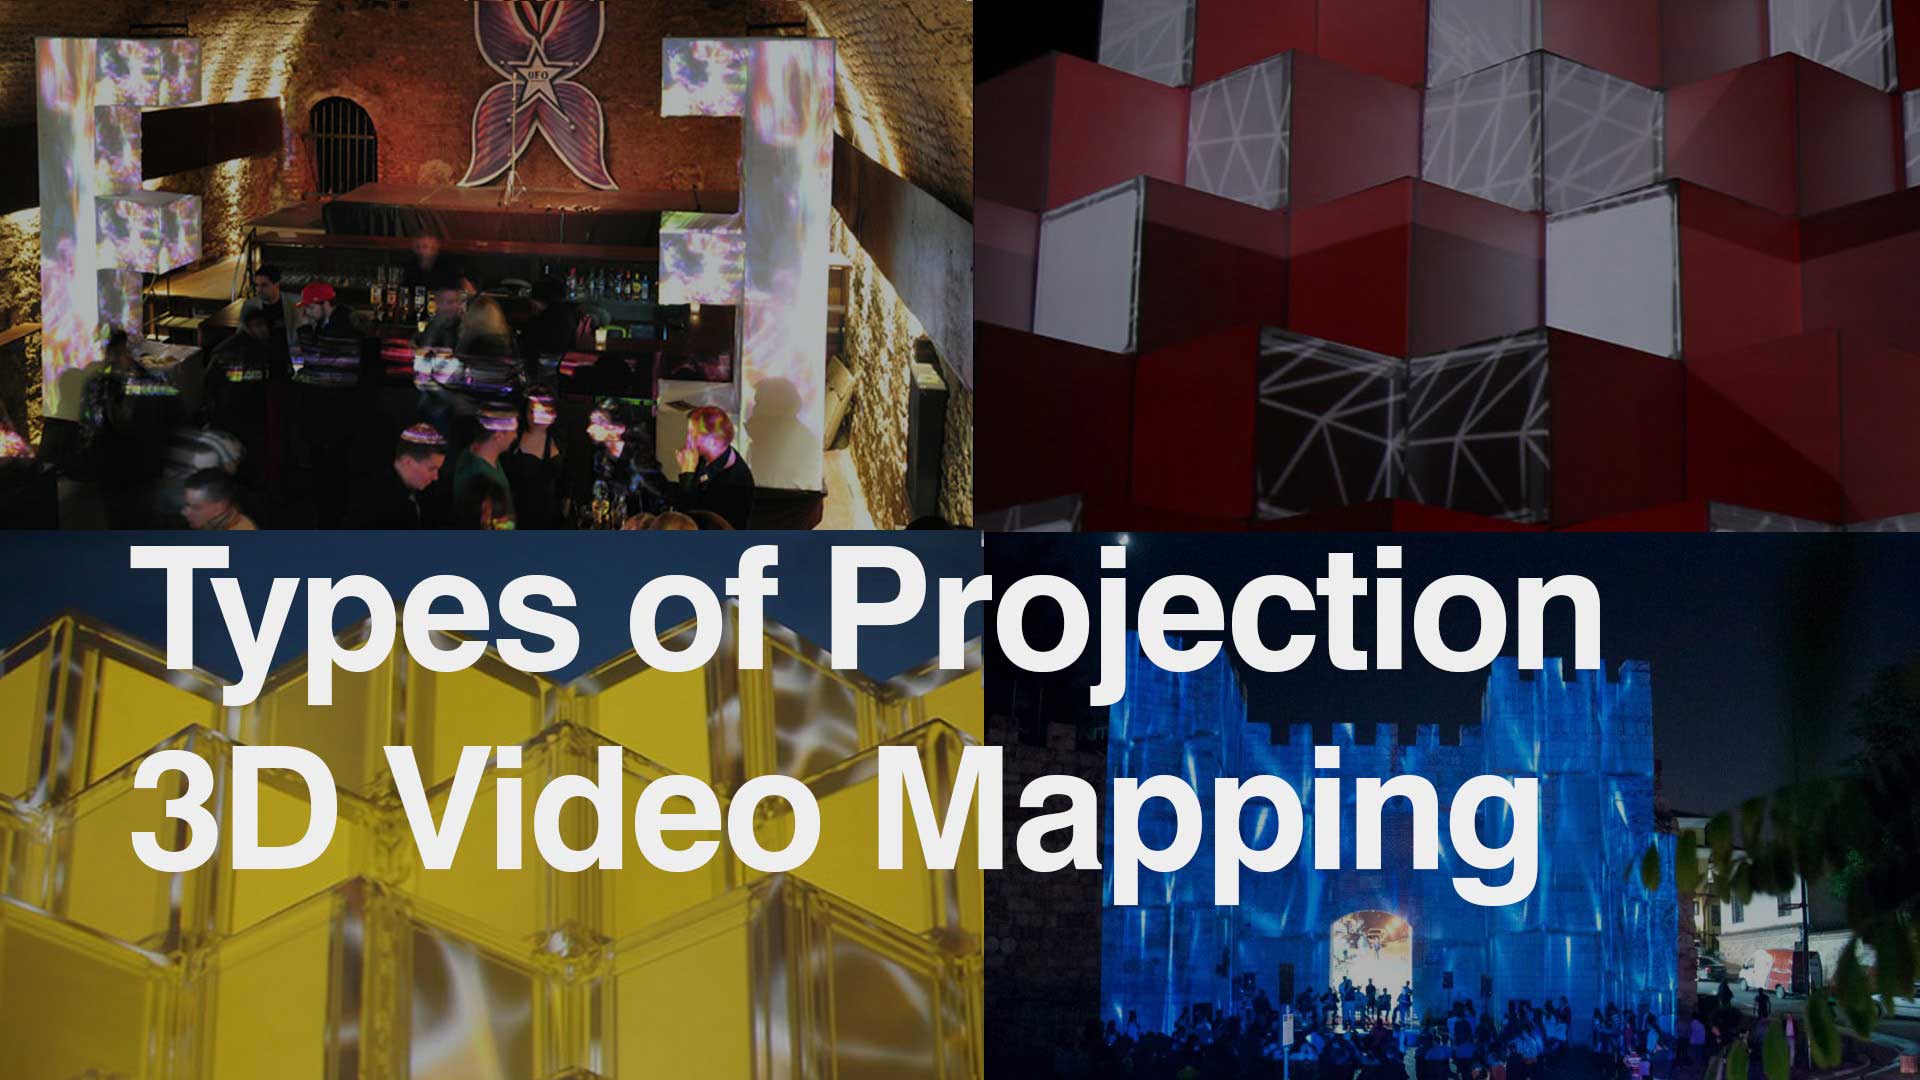 Projection mapping types